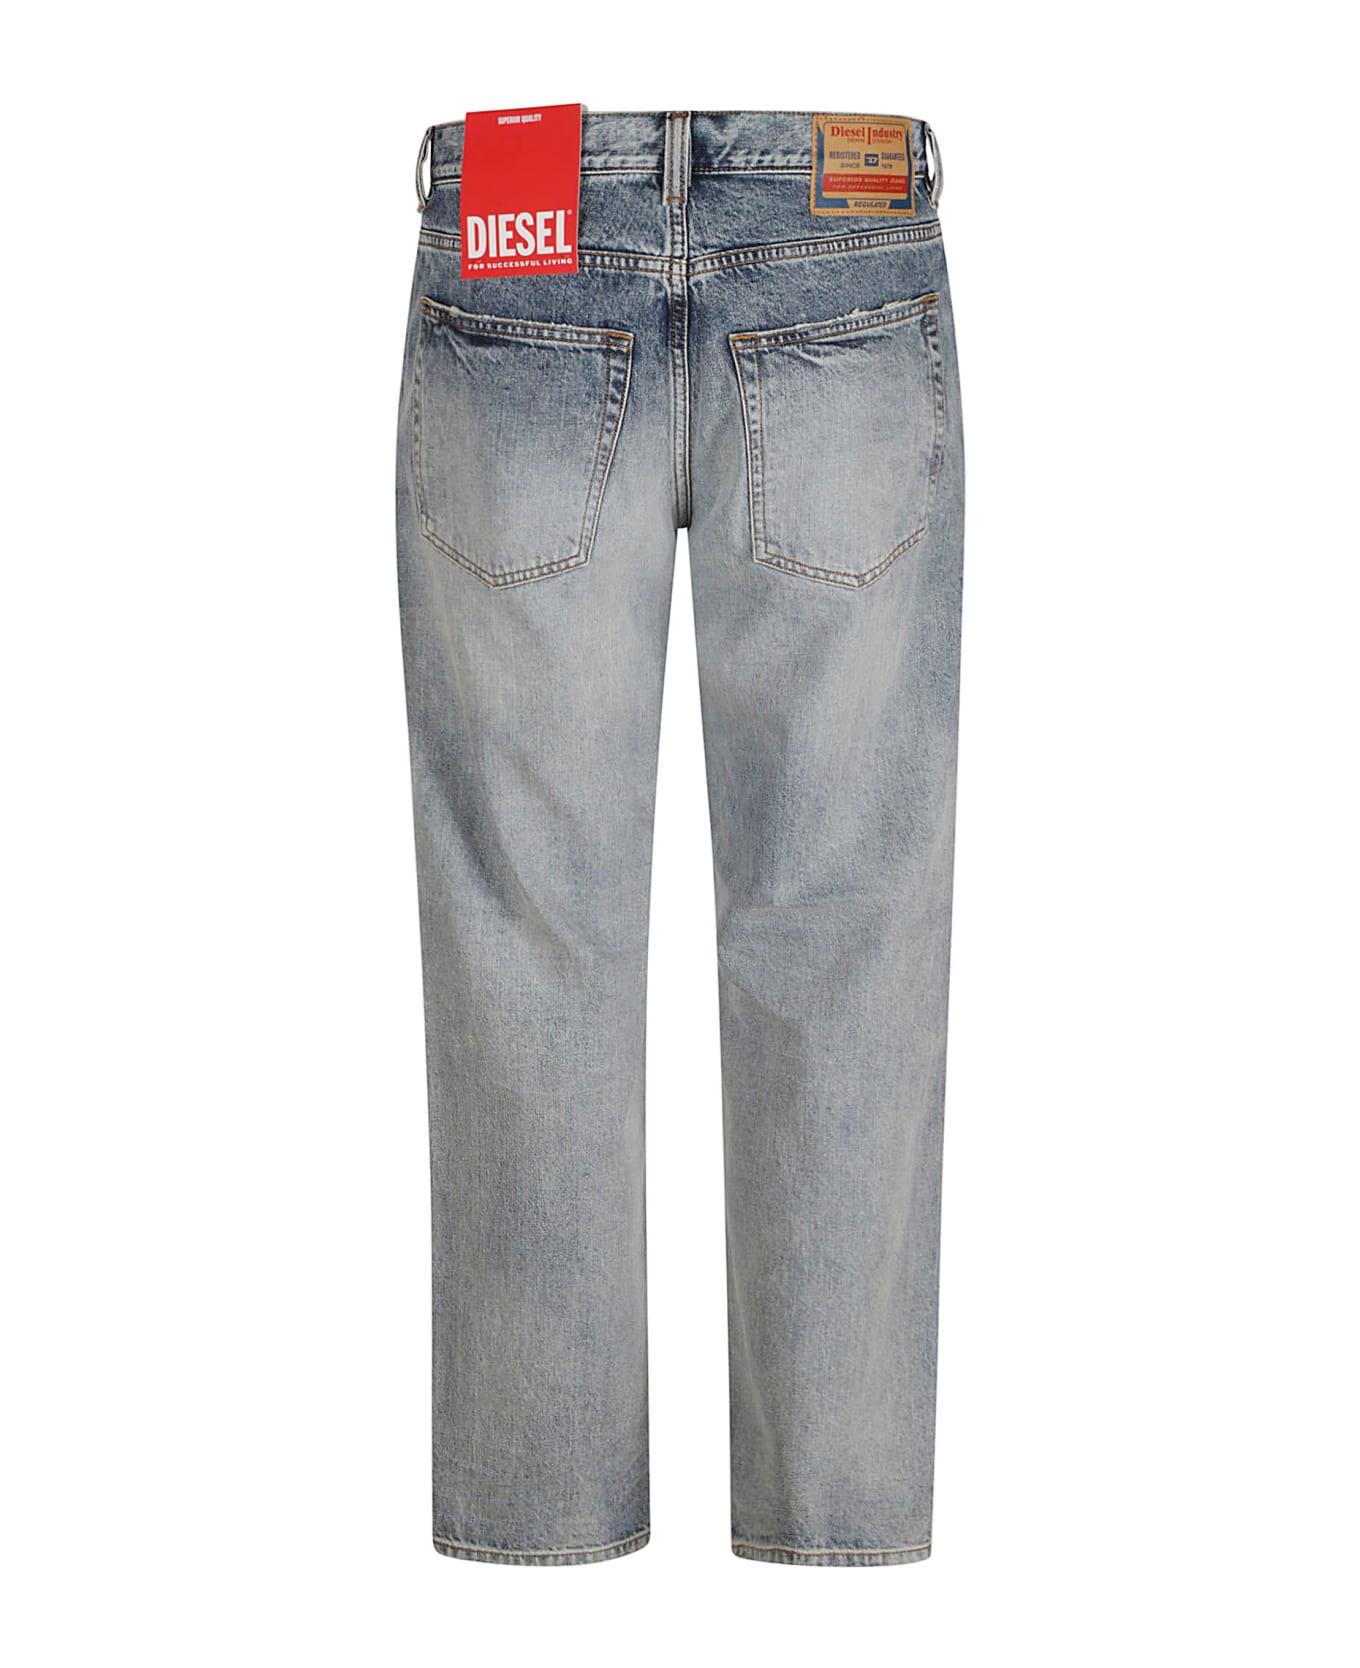 Diesel Straight Buttoned Jeans - Non dye